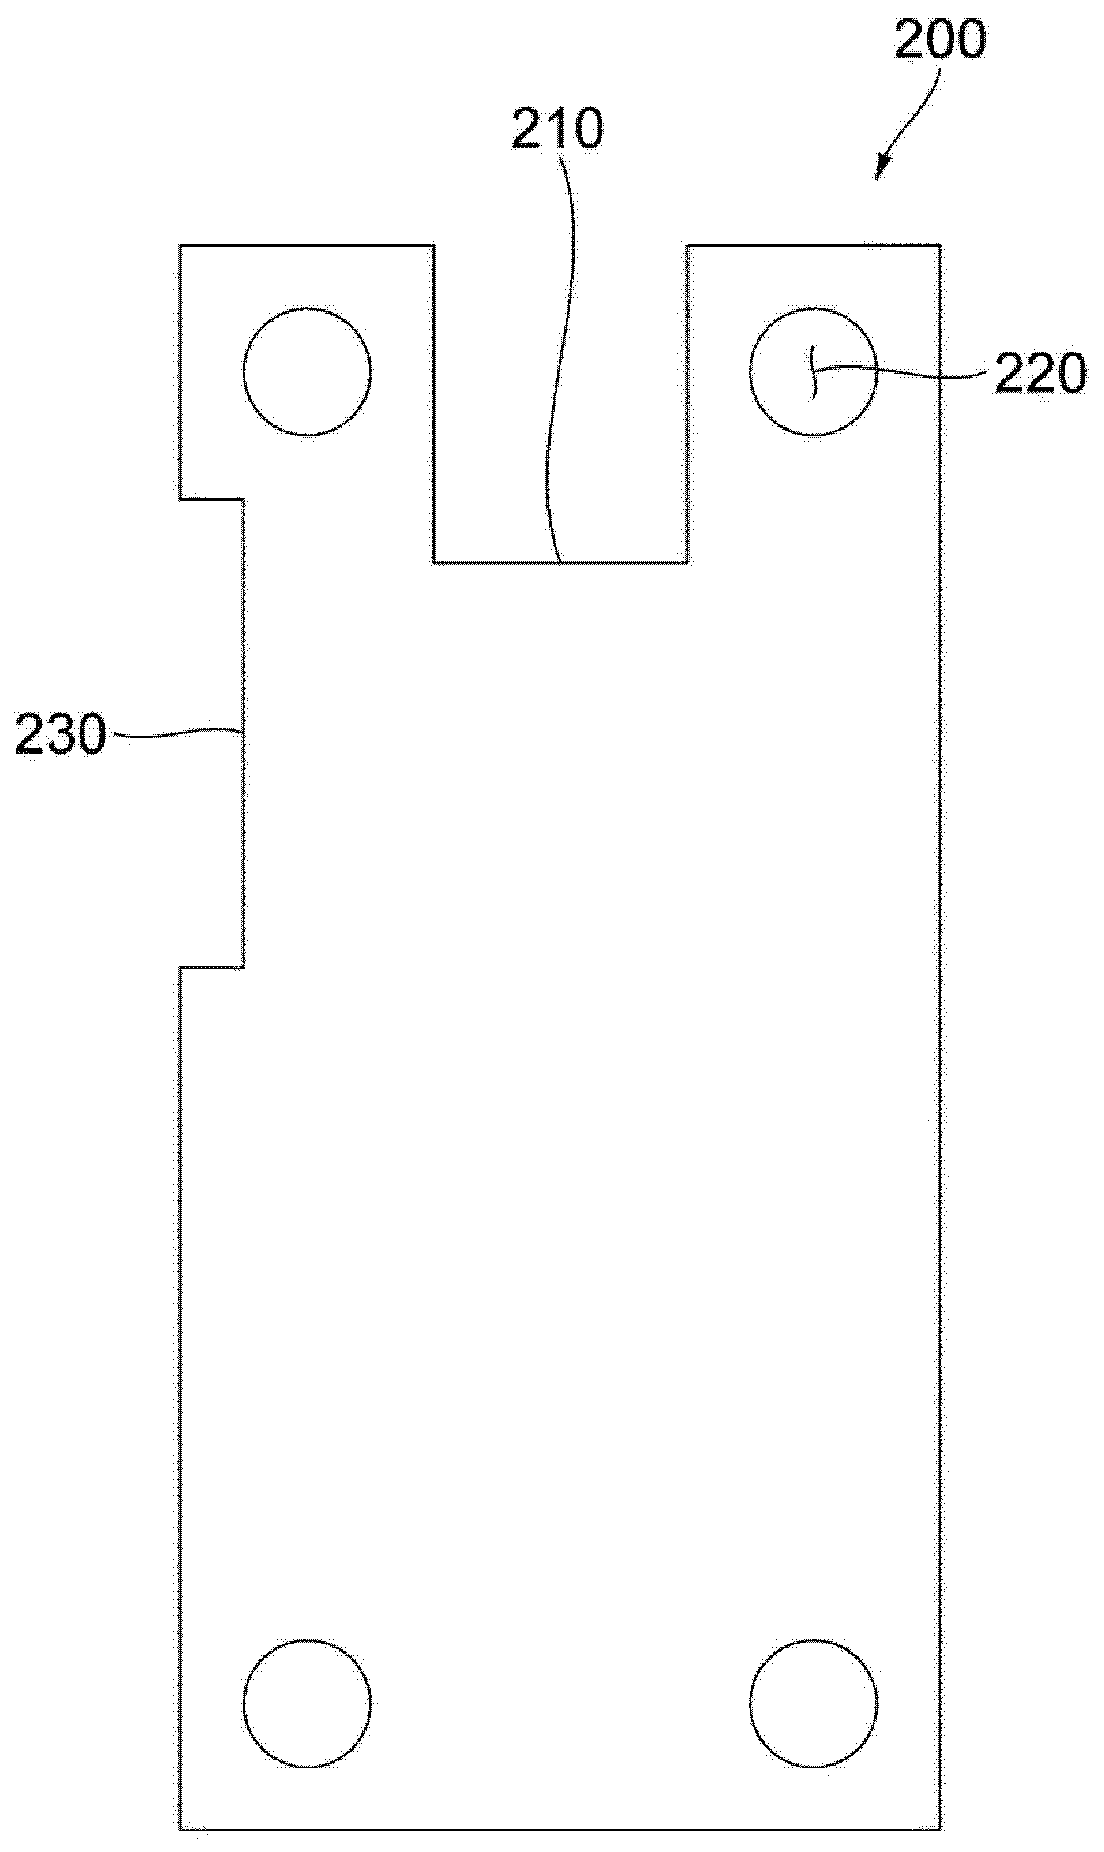 Jig for pressing gas analysis monocell, and gas analysis device including same